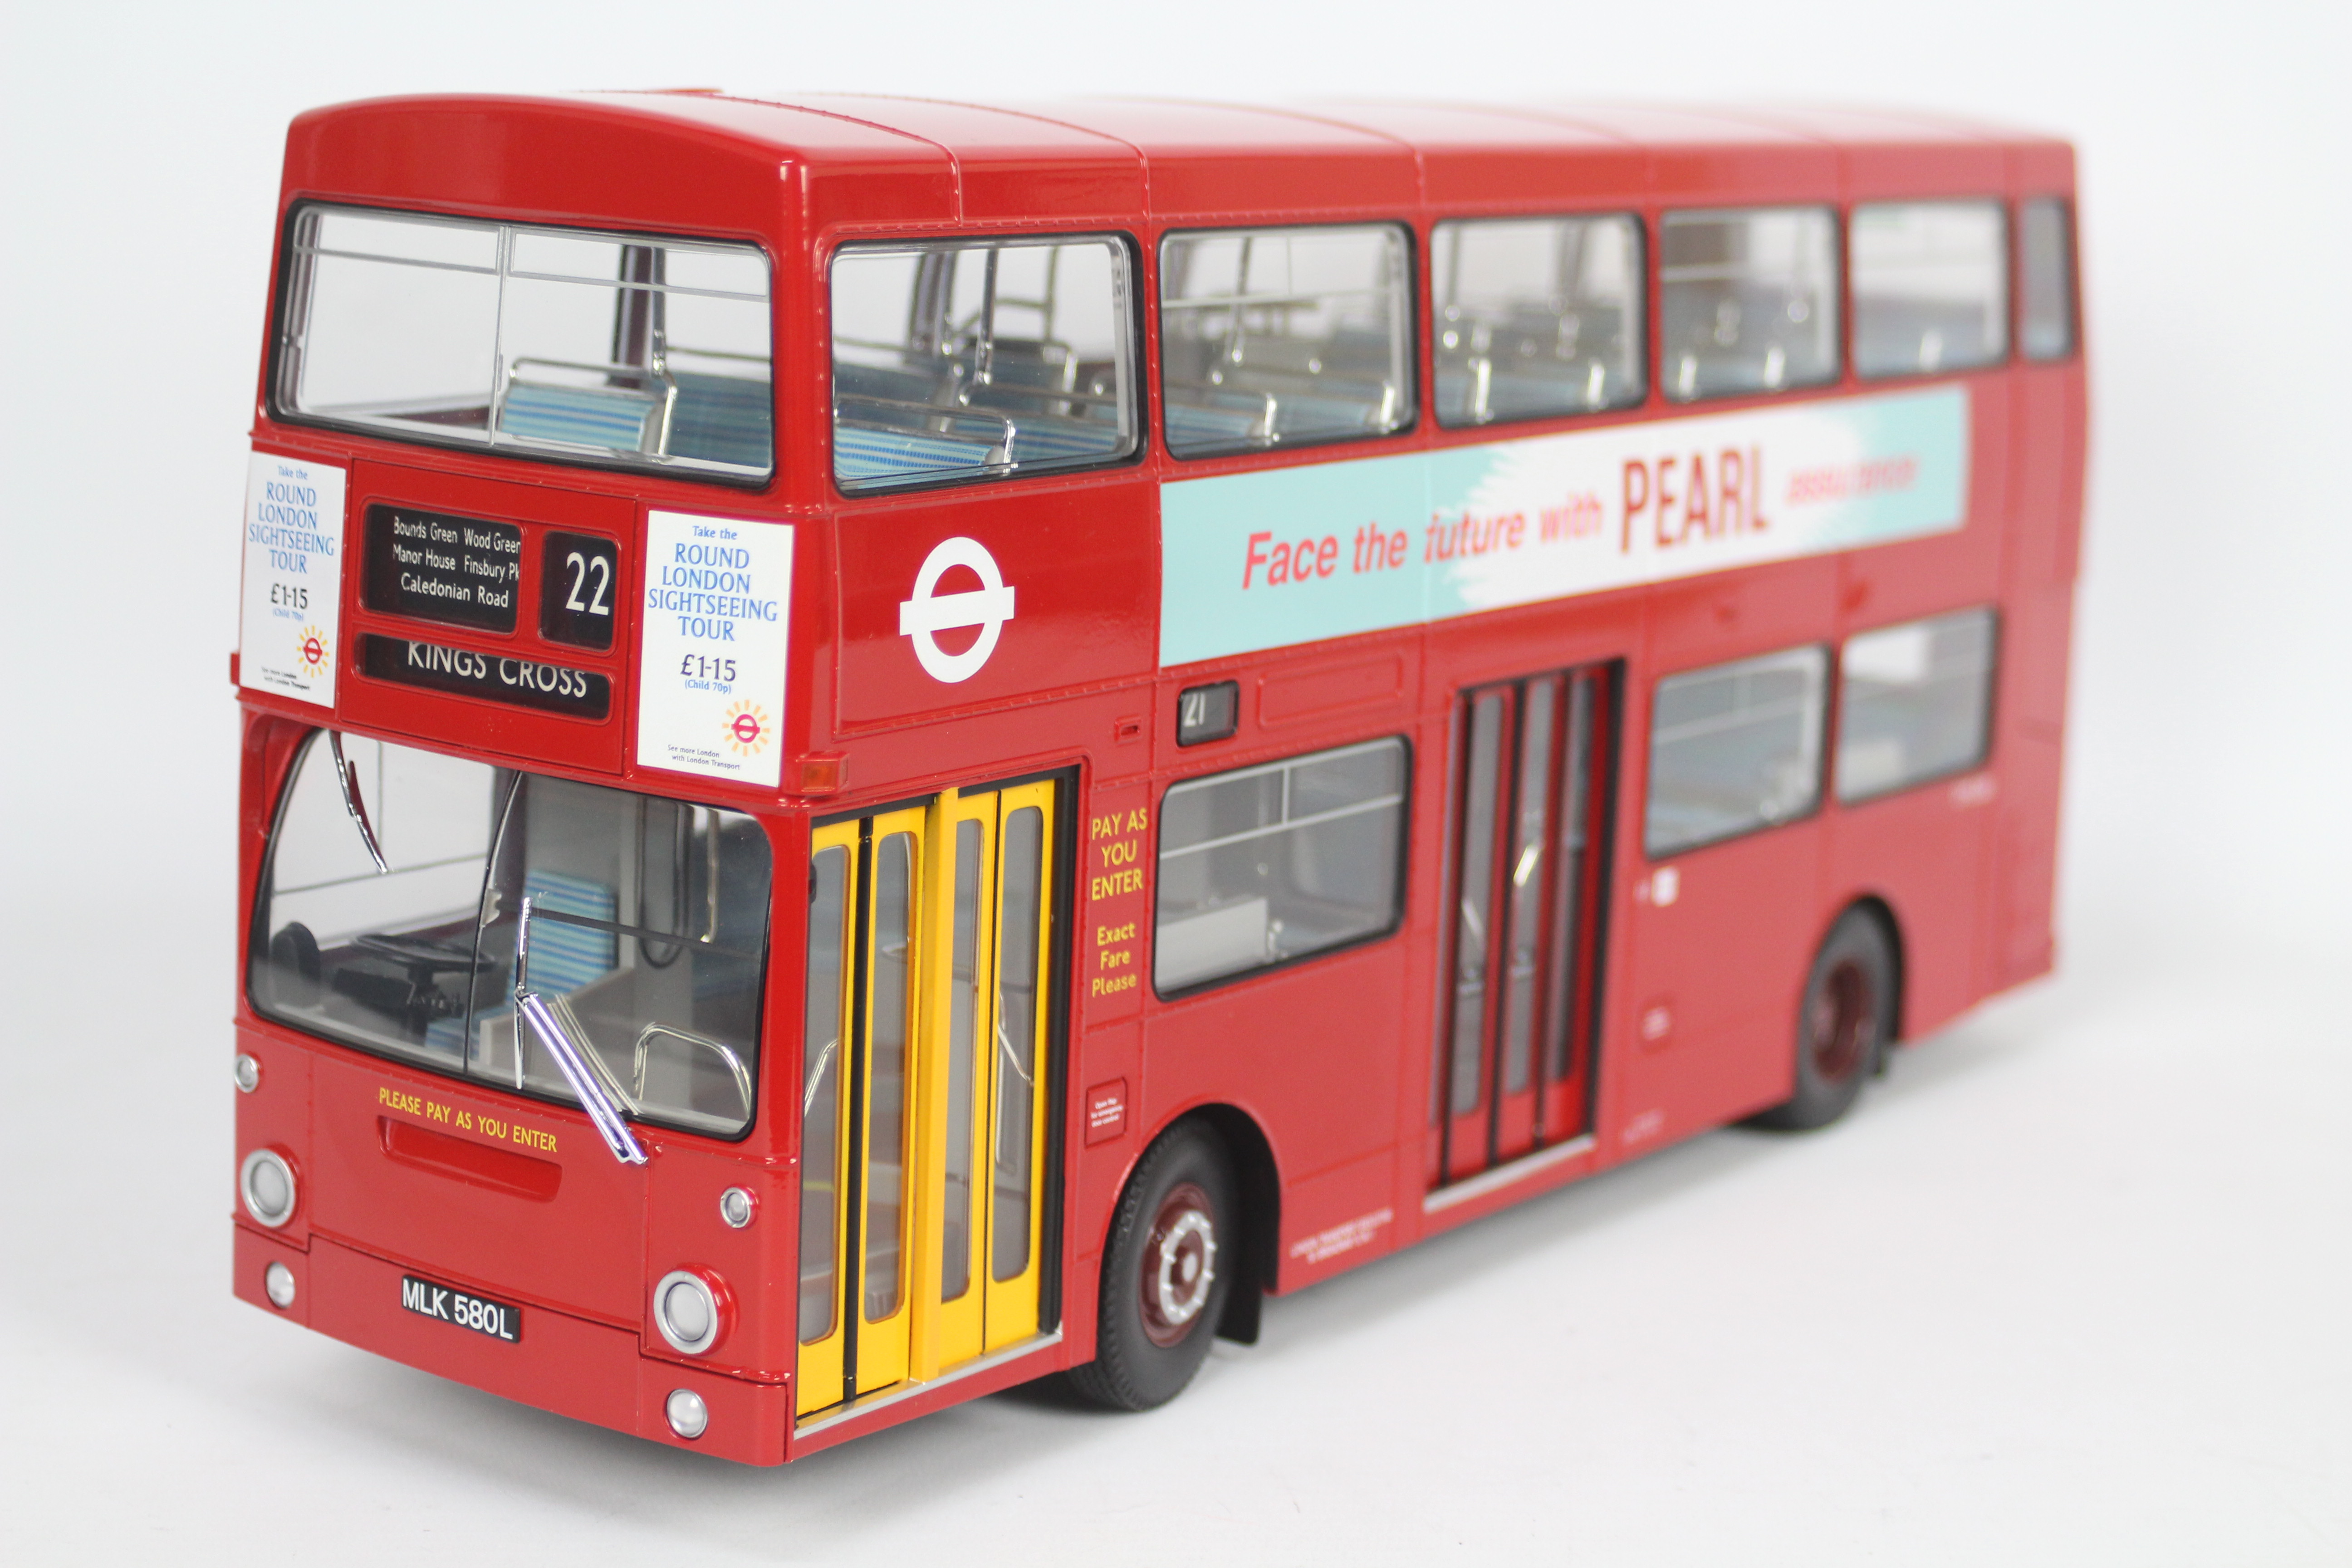 Gilbow - A boxed 1:24 scale Daimler DMS London Transport Bus # 99101. - Image 4 of 6